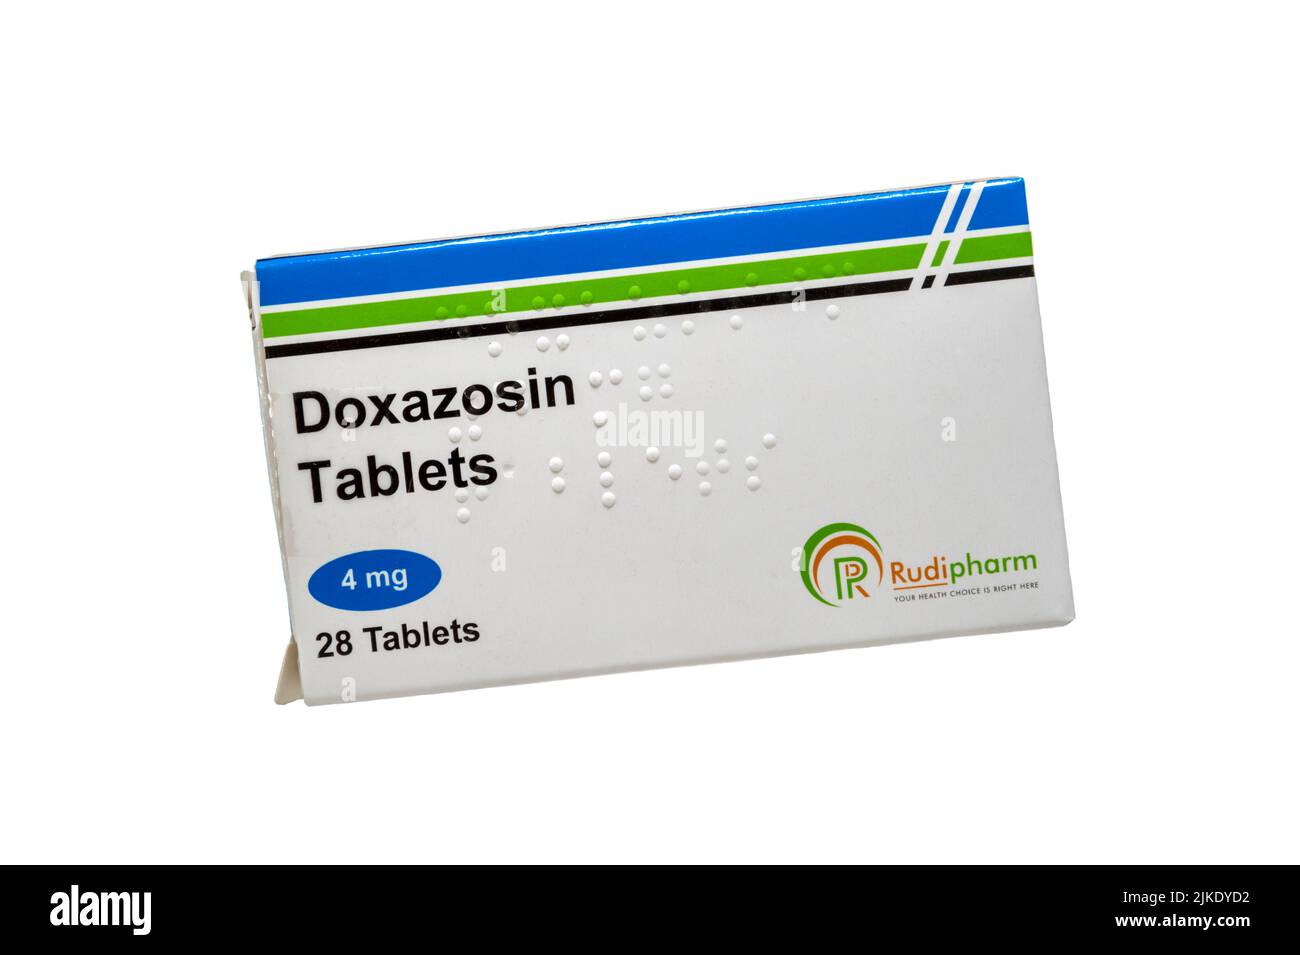 Stock image of a packet of Doxazosin blood pressure tablets. Stock Photo